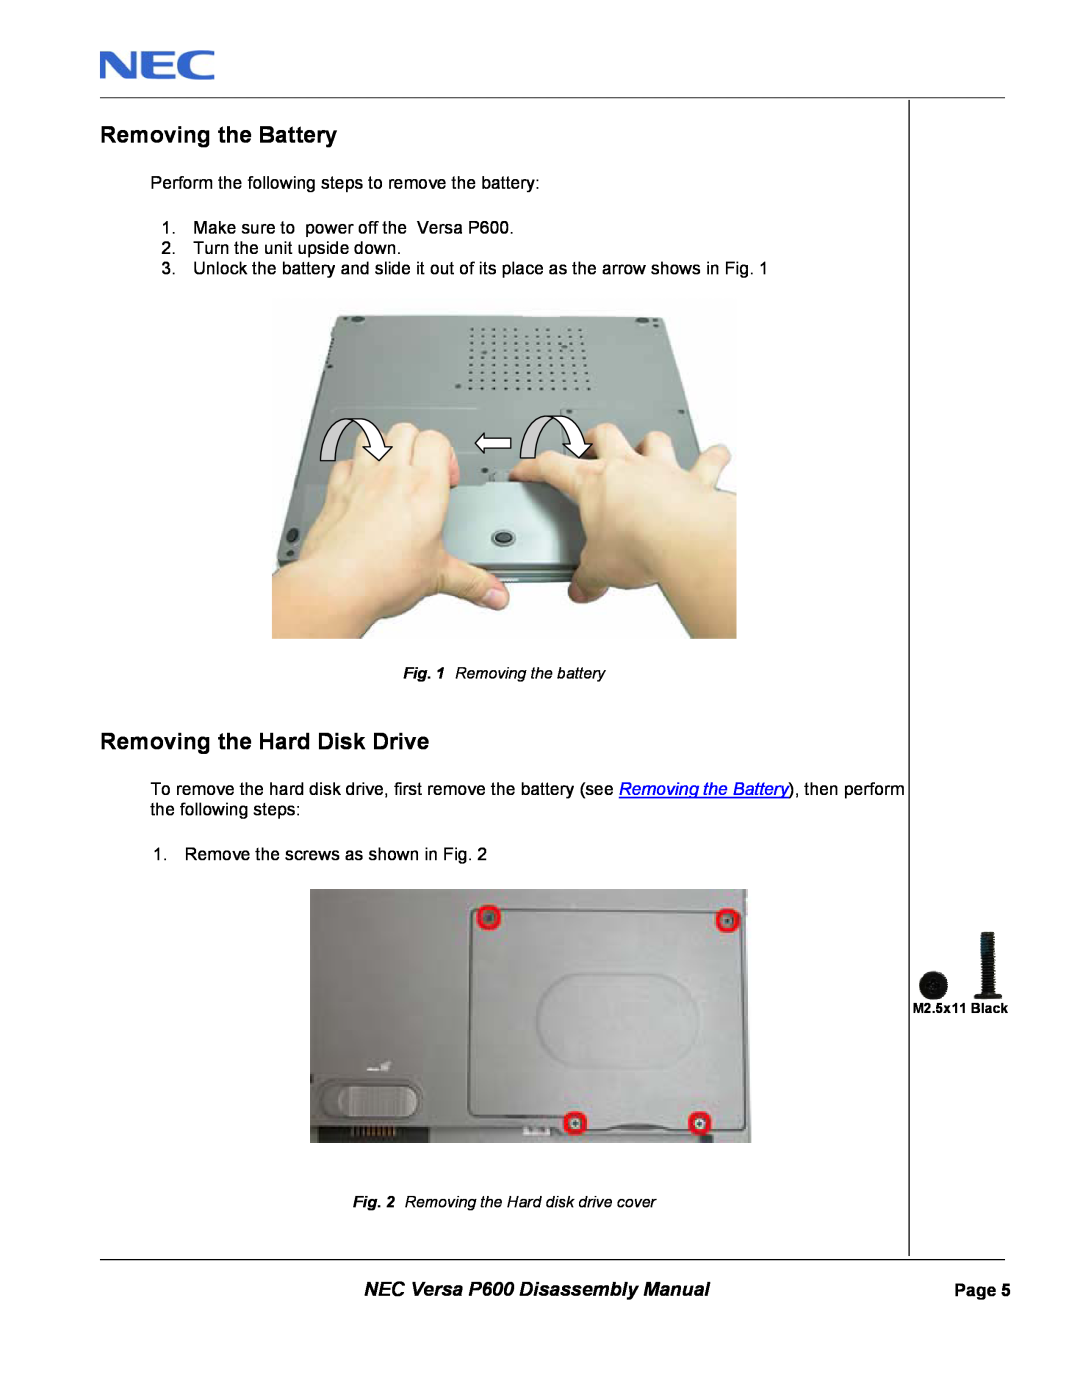 NEC manual Removing the Battery, Removing the Hard Disk Drive, NEC Versa P600 Disassembly Manual 